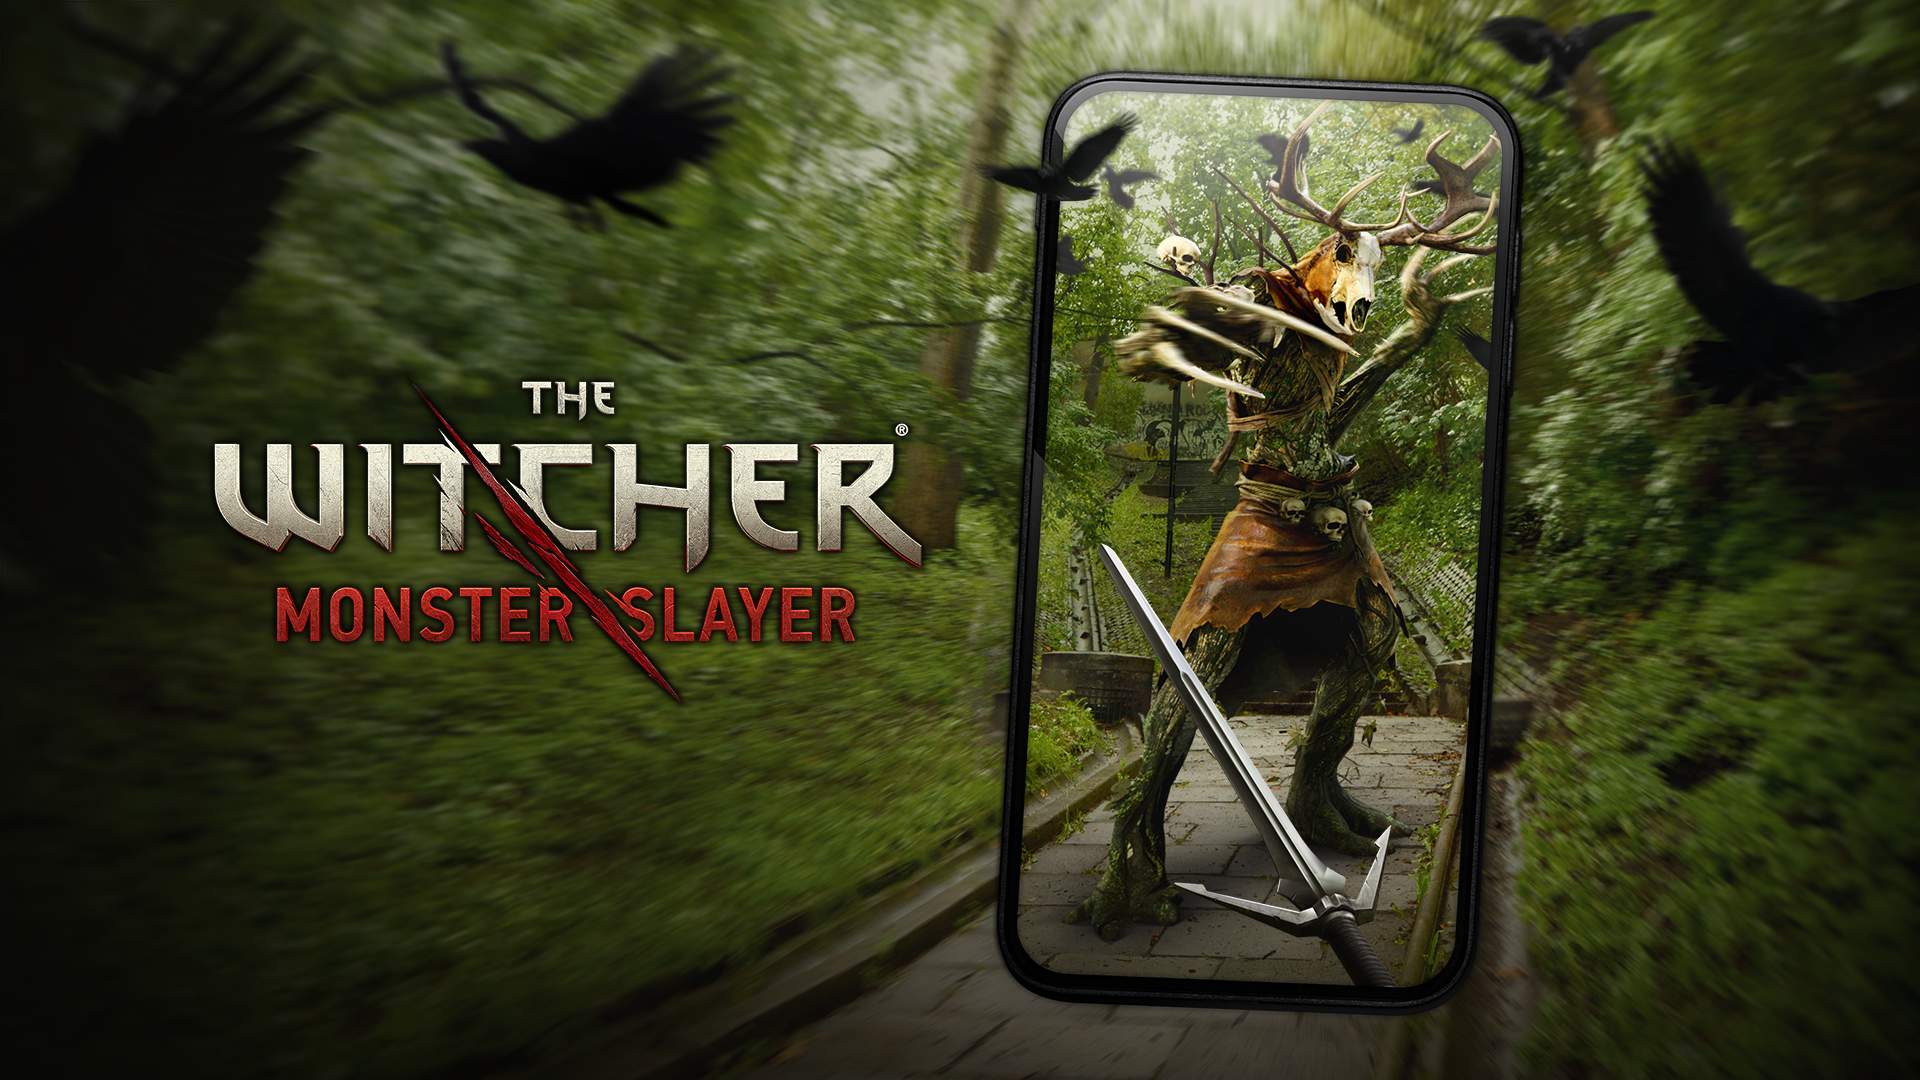 Thewitcher Com Home Of The Witcher Games